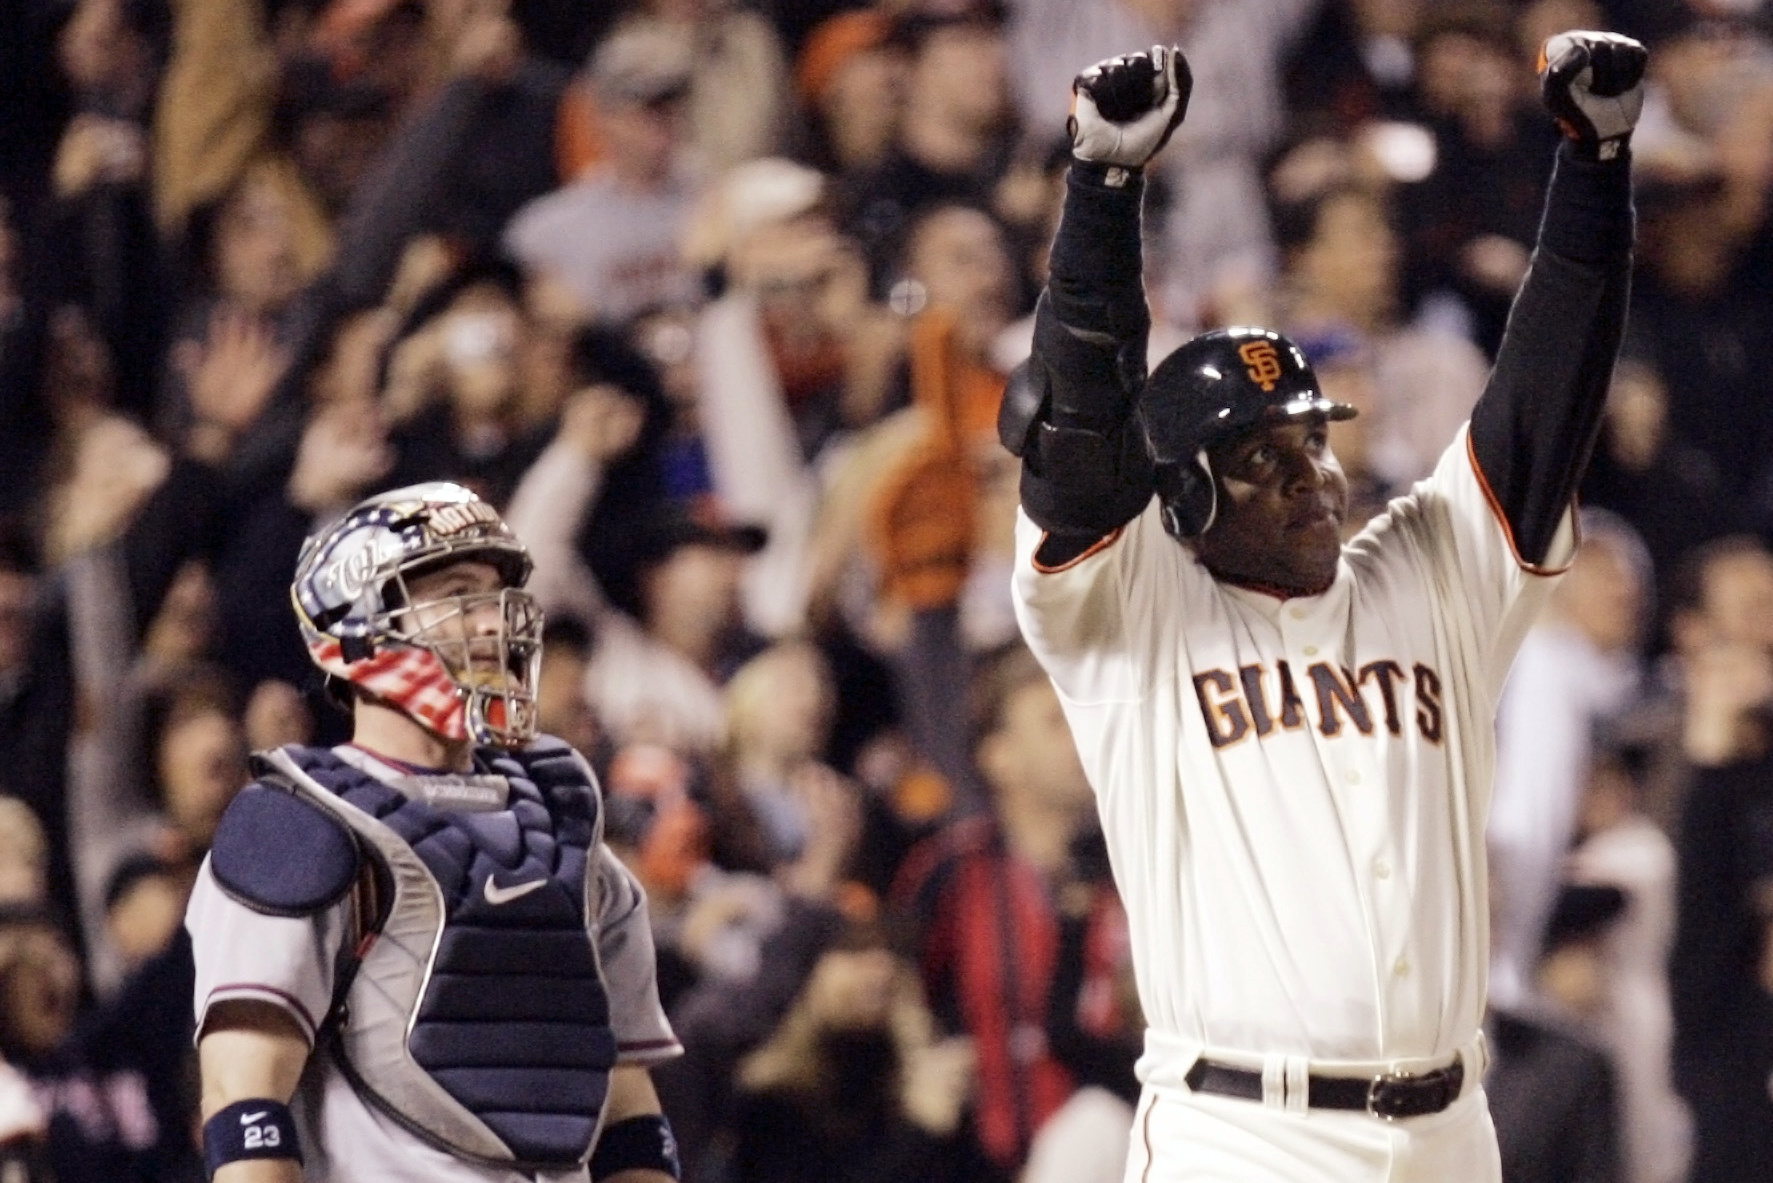 Barry Bonds' record-setting 762nd home run ball up for auction